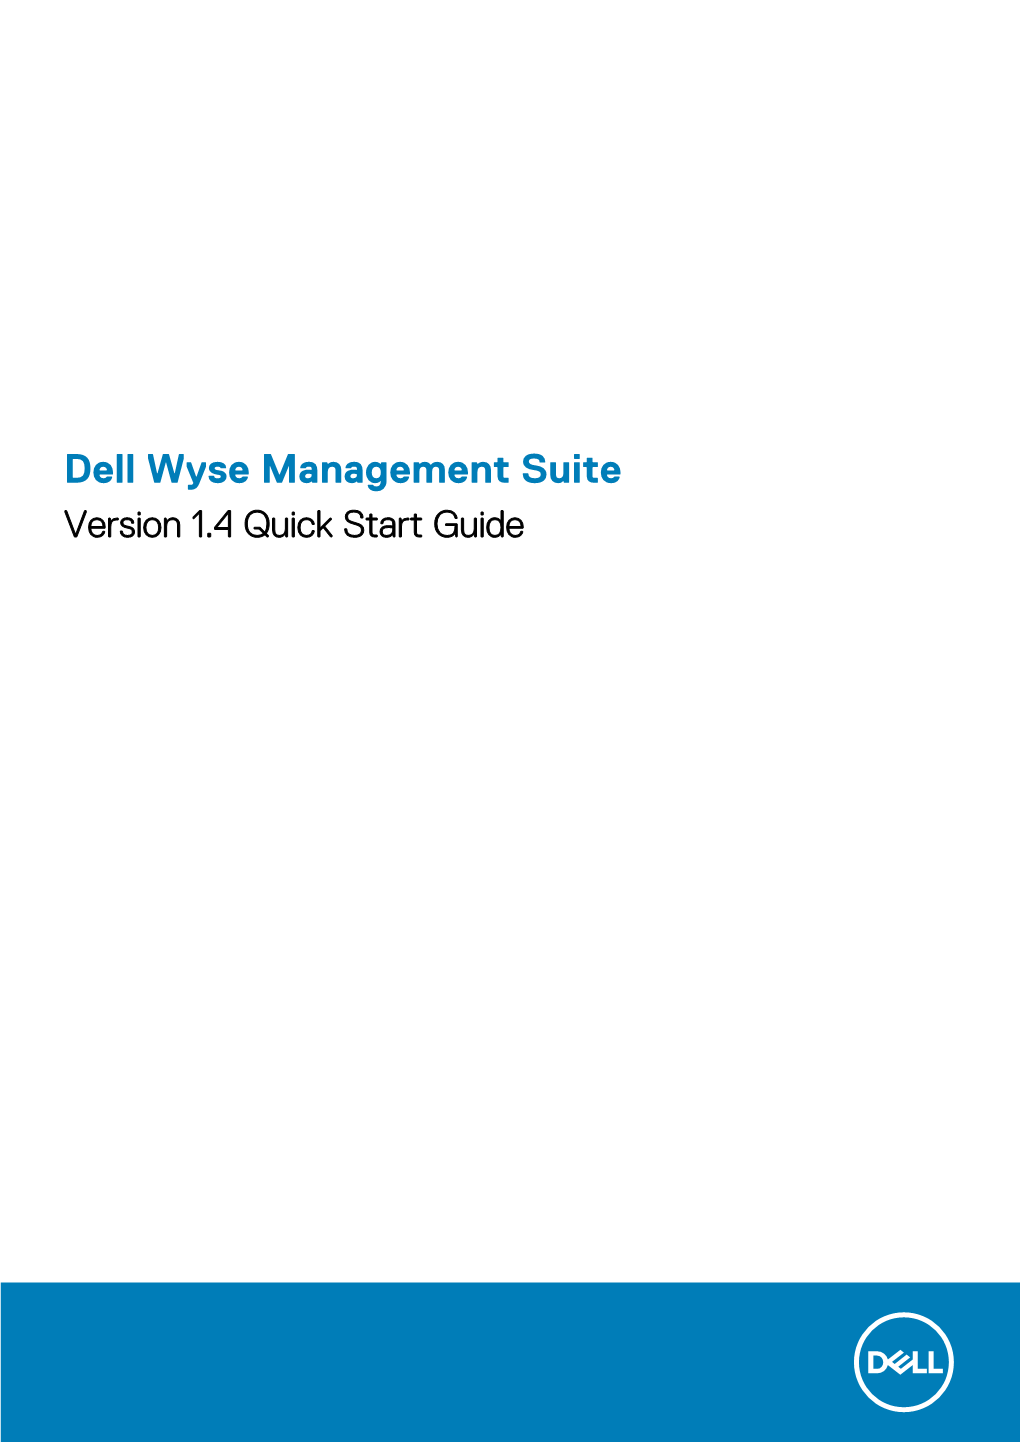 Dell Wyse Management Suite Version 1.4 Quick Start Guide Notes, Cautions, and Warnings